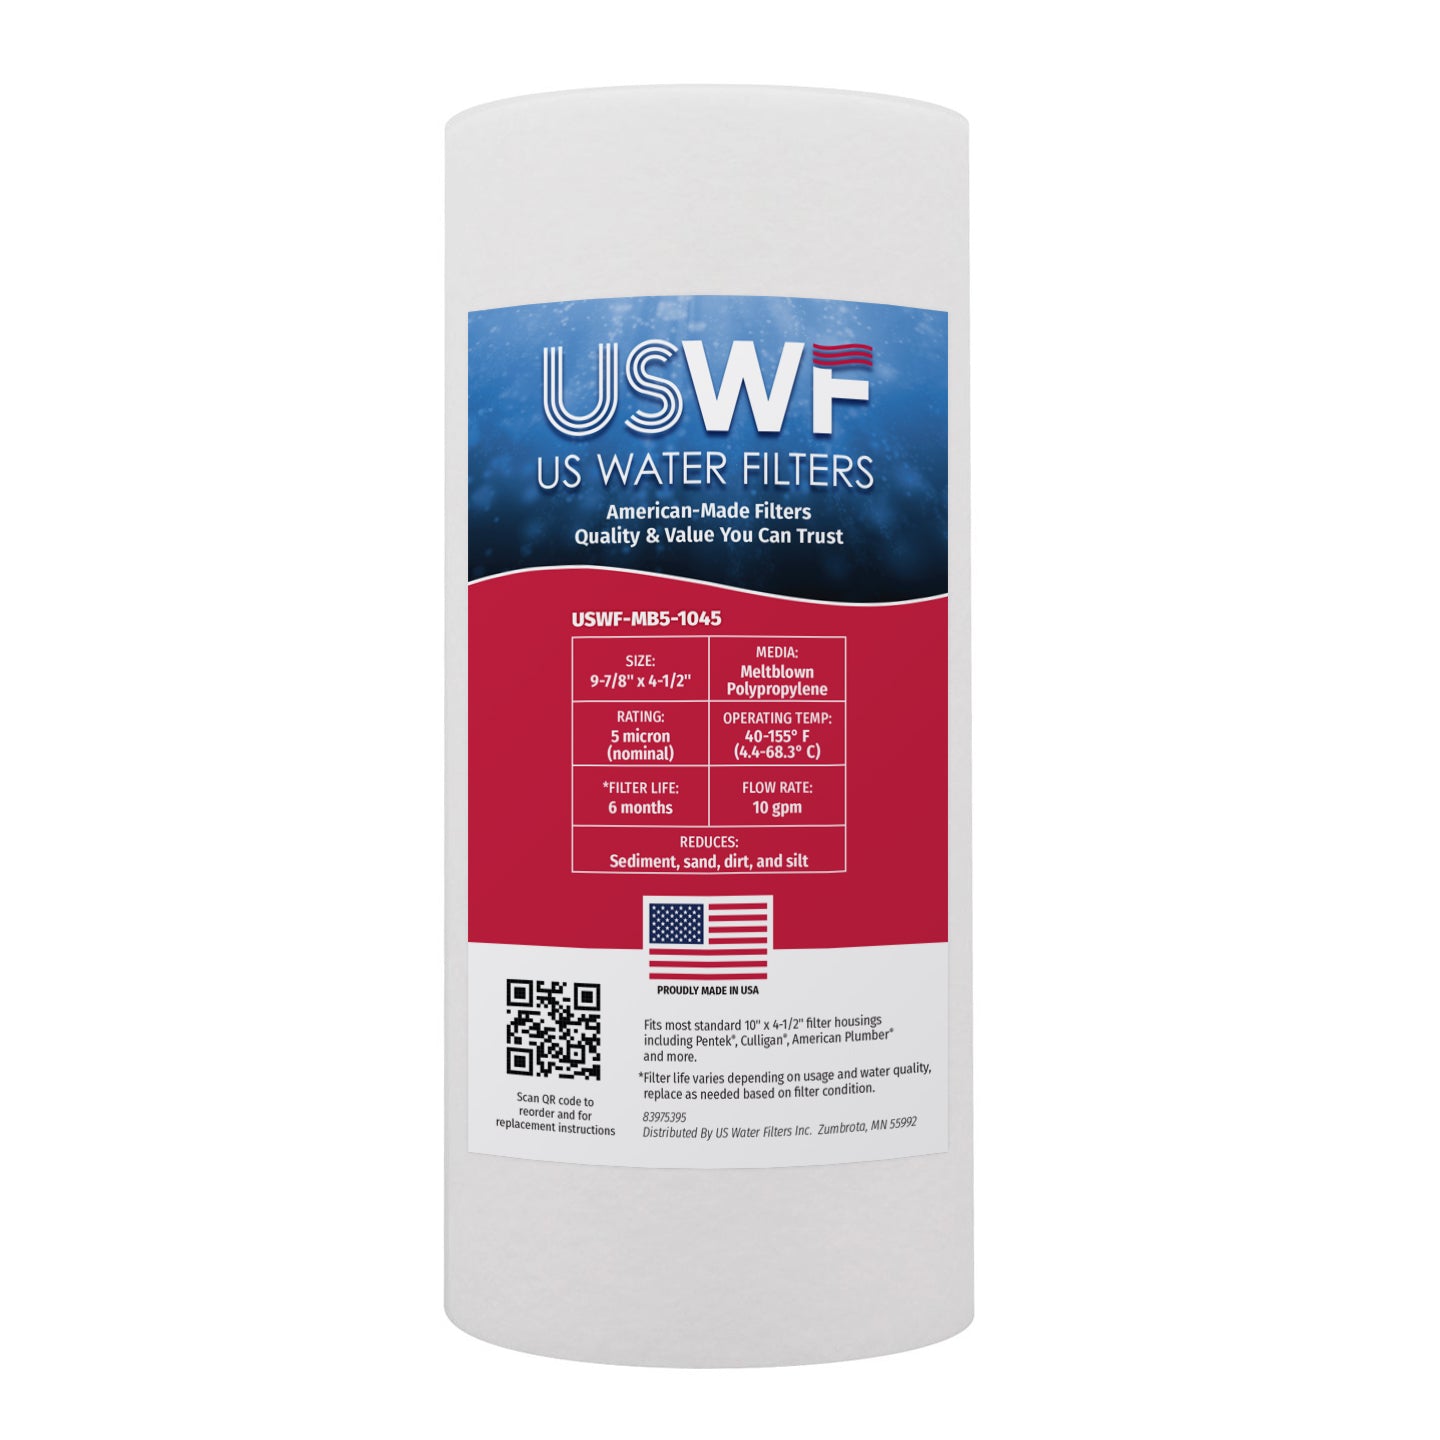 2-Stage Chloramine Reduction Whole House Water Filtration System by USWF, Sediment and Chloramine Reduction Carbon Block, 3/4" Inlet/Outlet